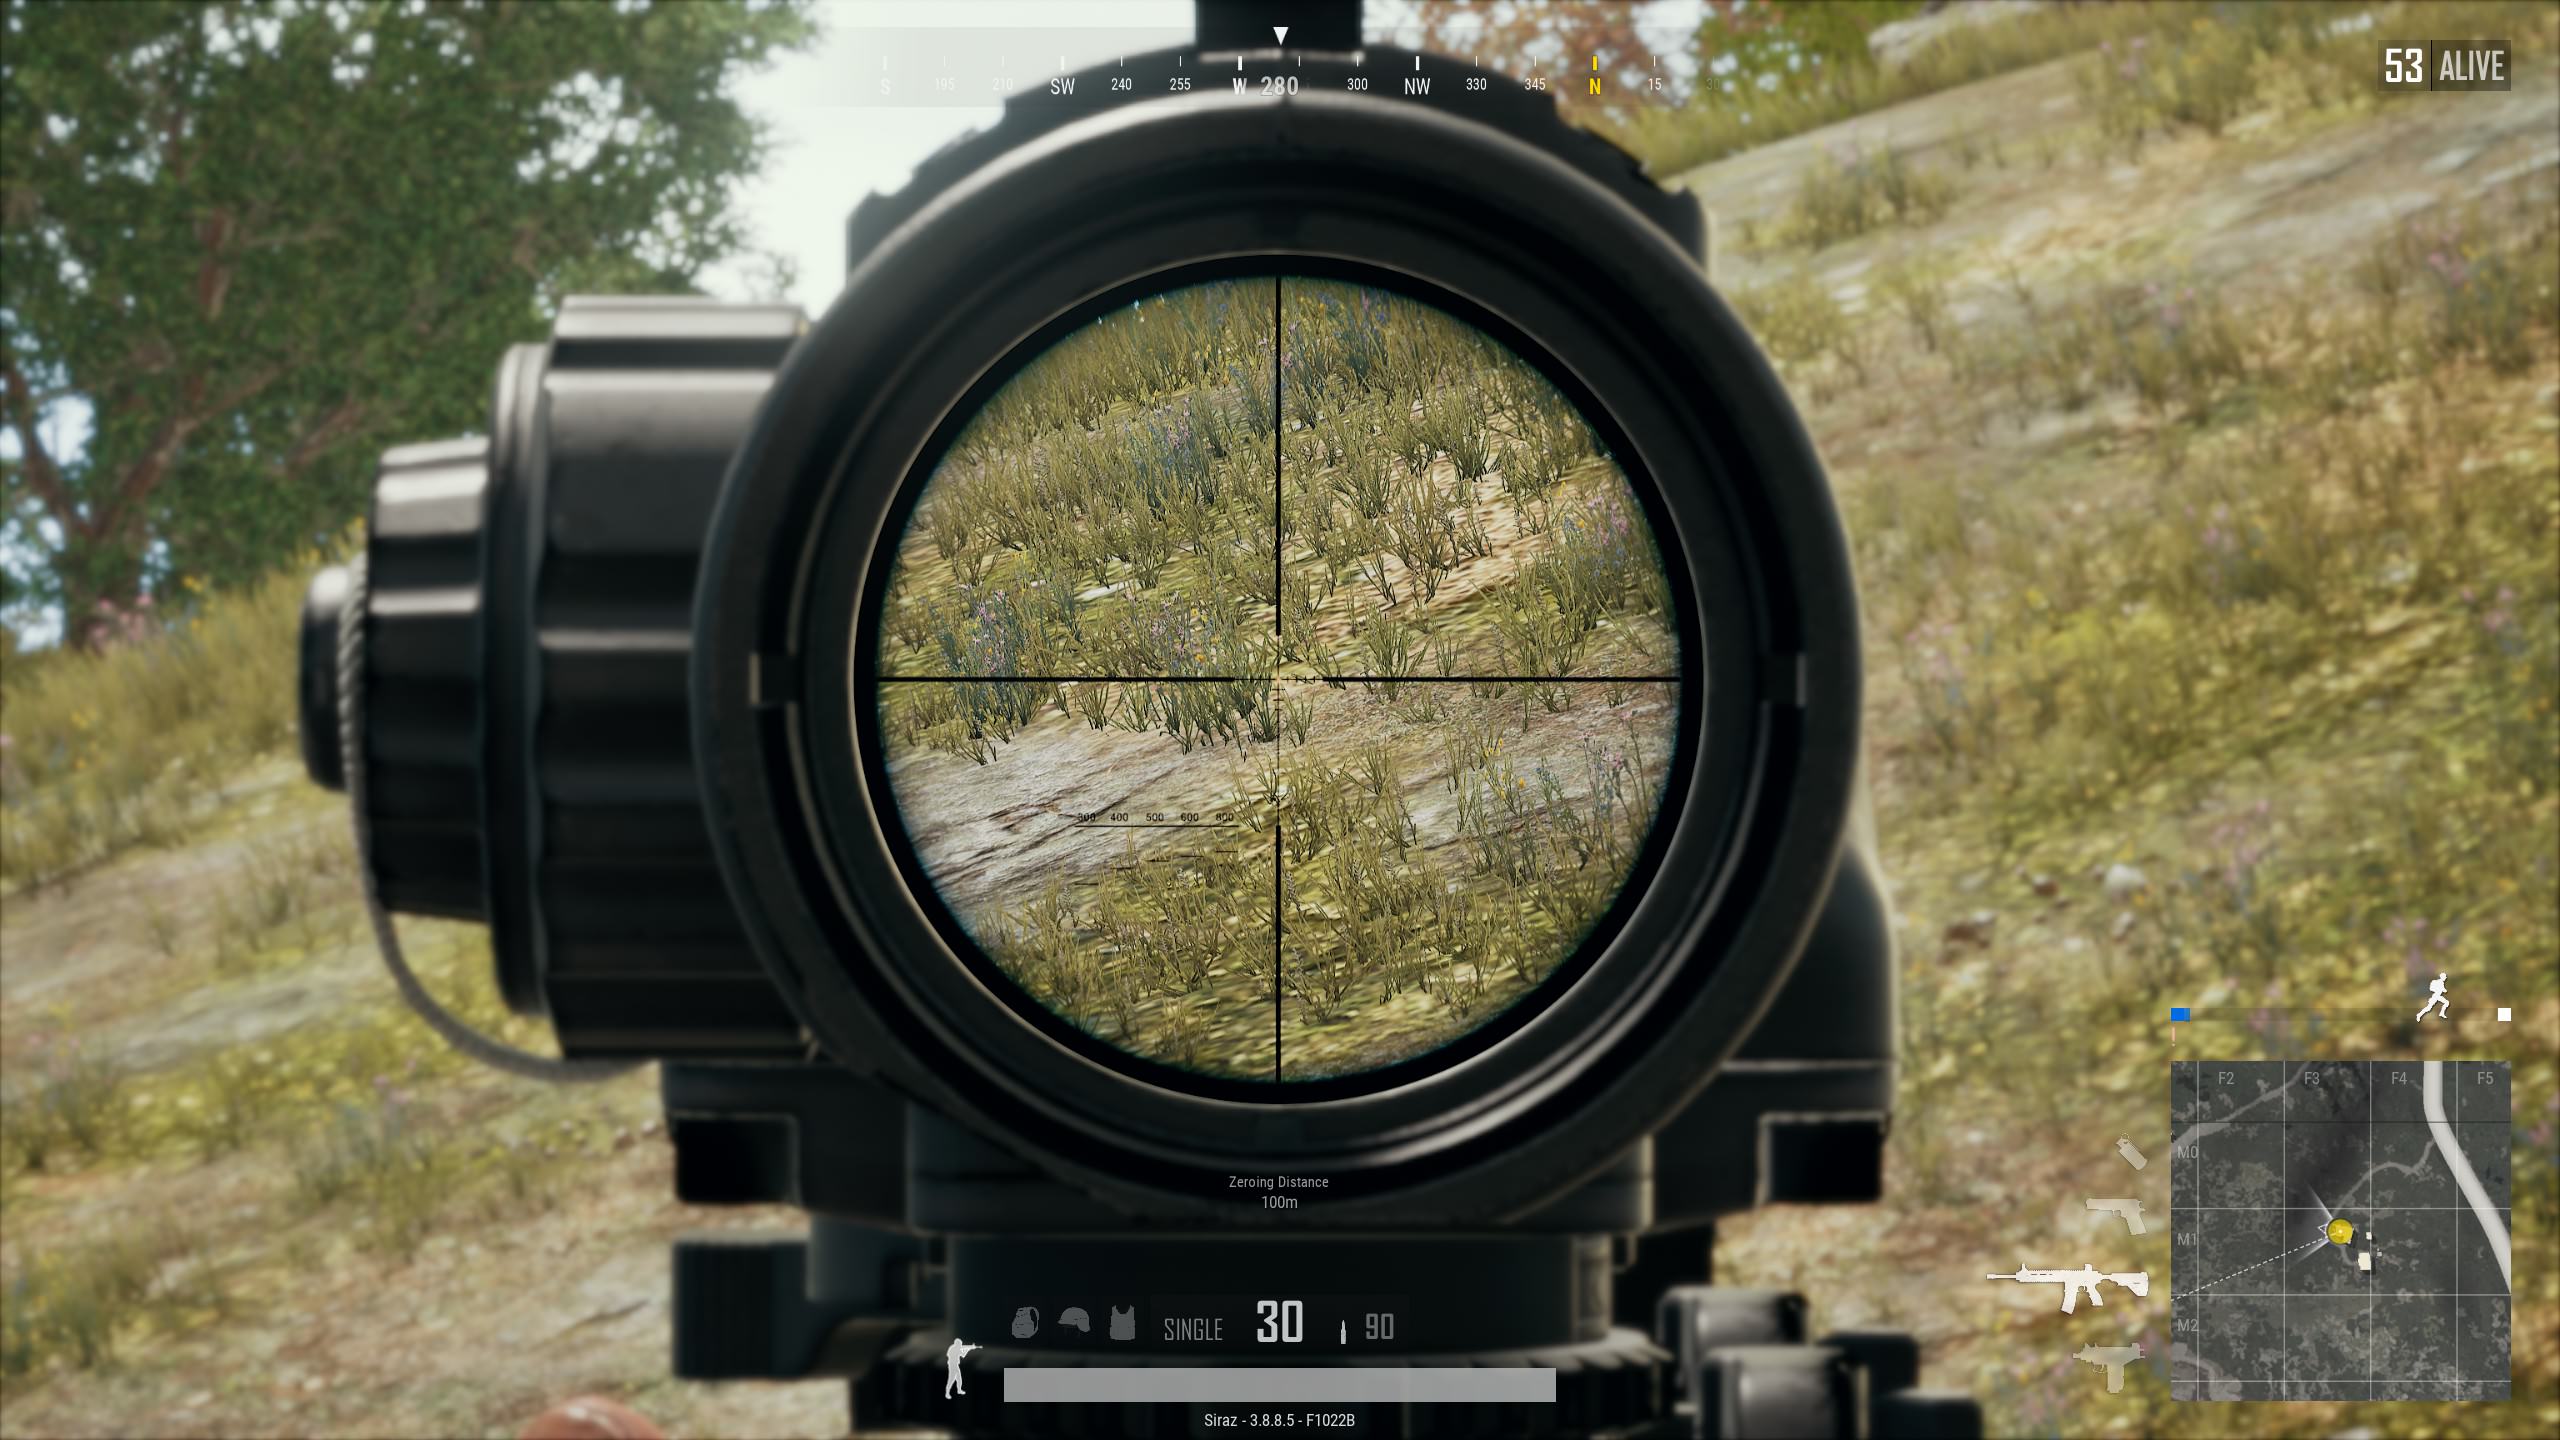 New sights on the test server 6x scope, 3x scope and more